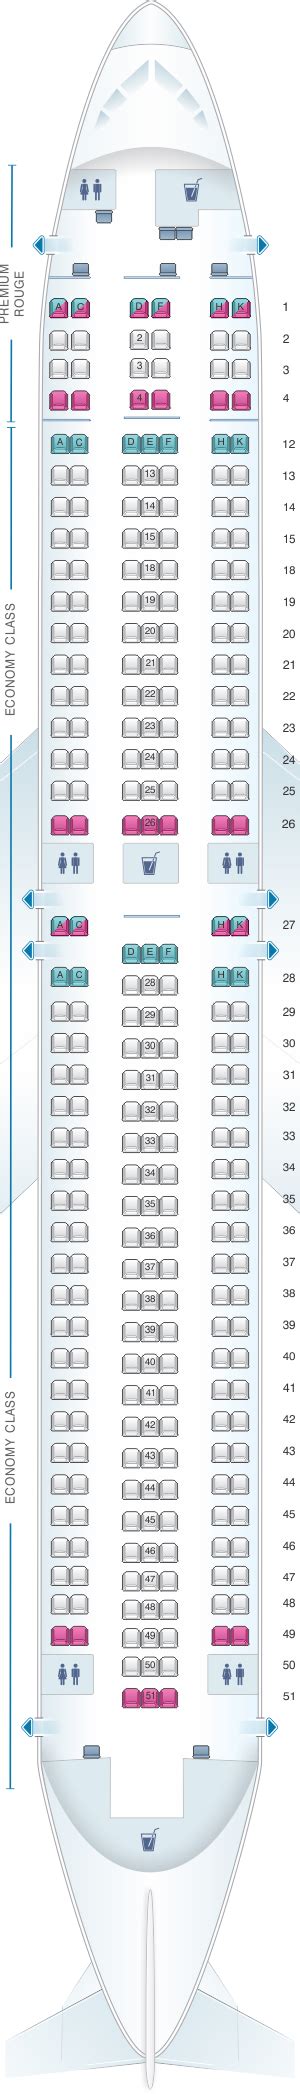 Air Canada Boeing Max Seating Plan Elcho Table